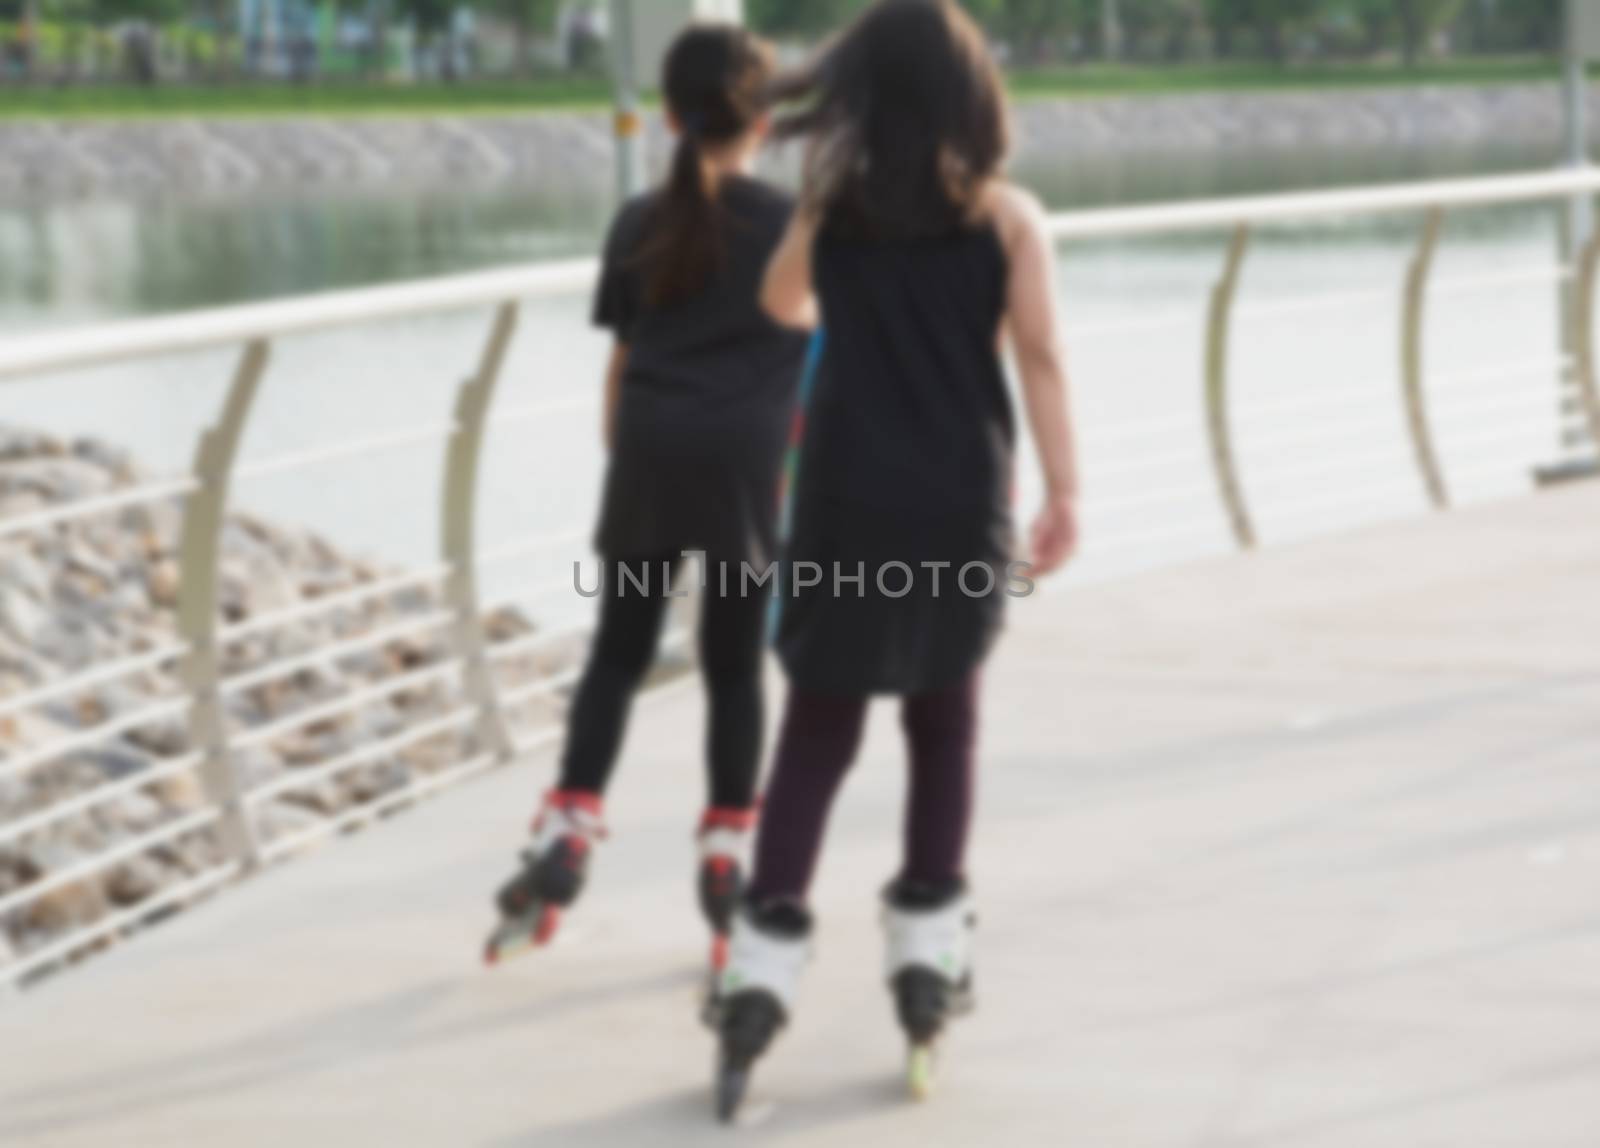 Blurred young people playing roller skates outdoor in park. Teen by kirisa99